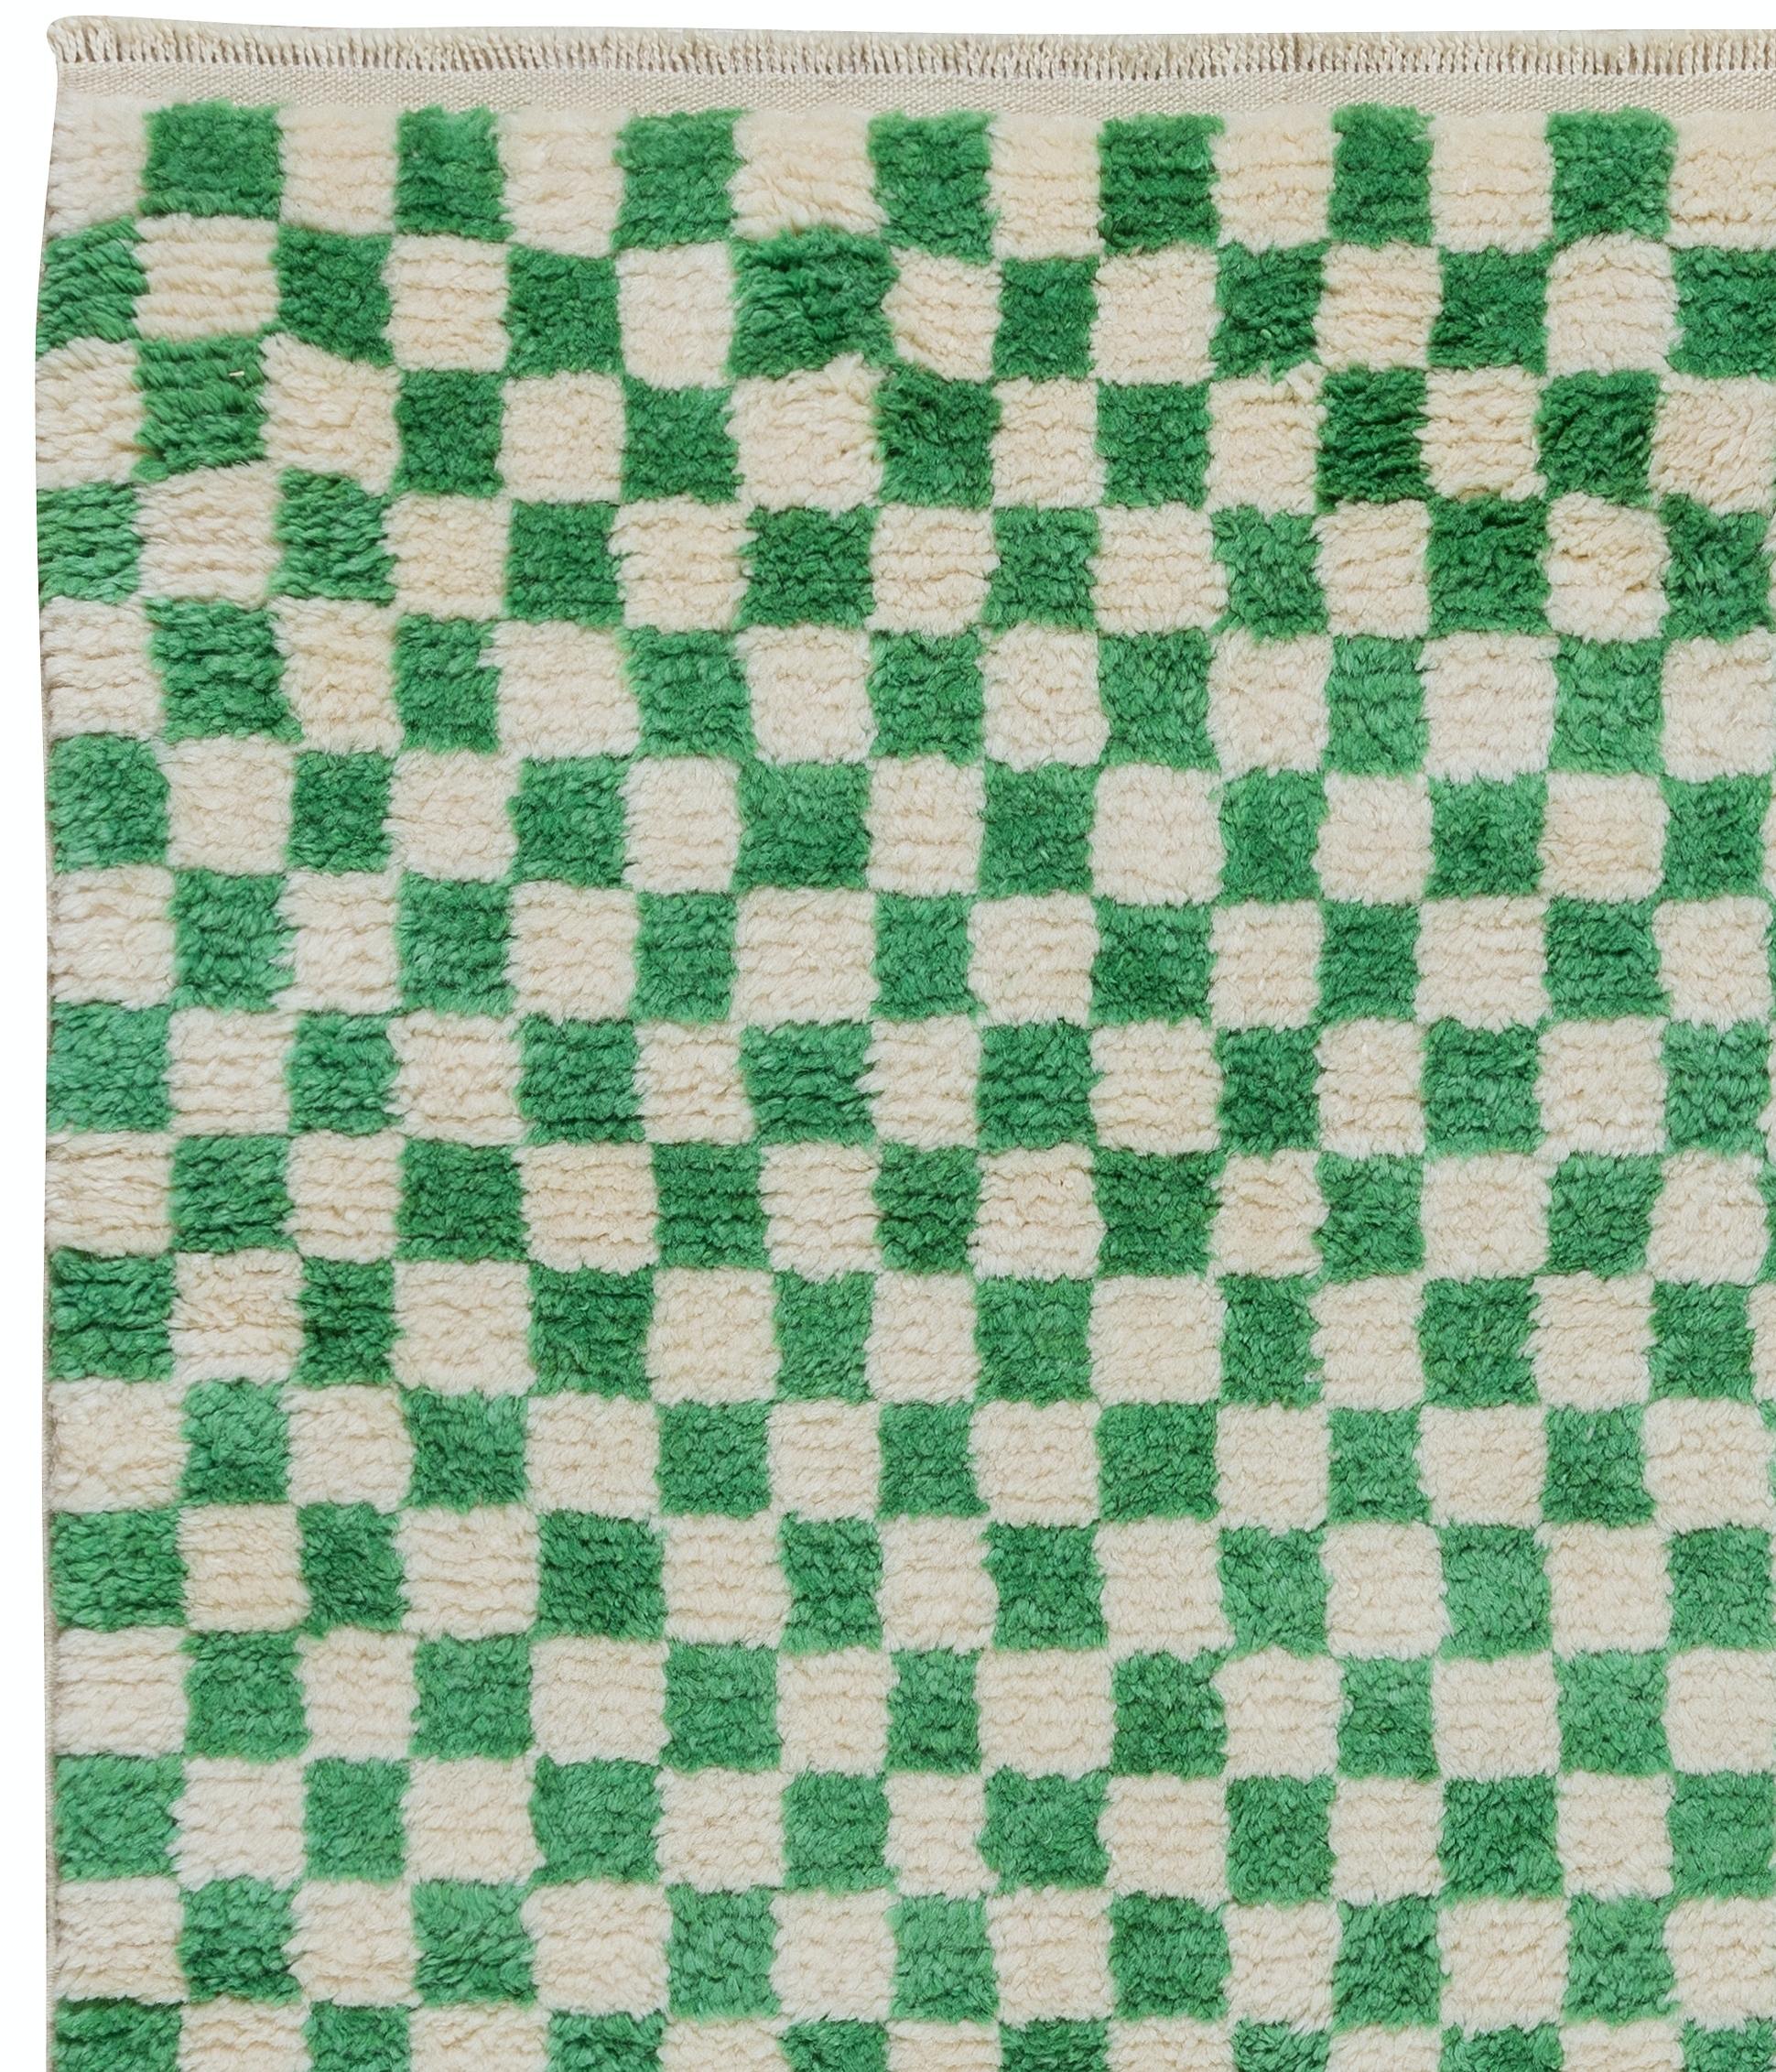 green and white checkered rug